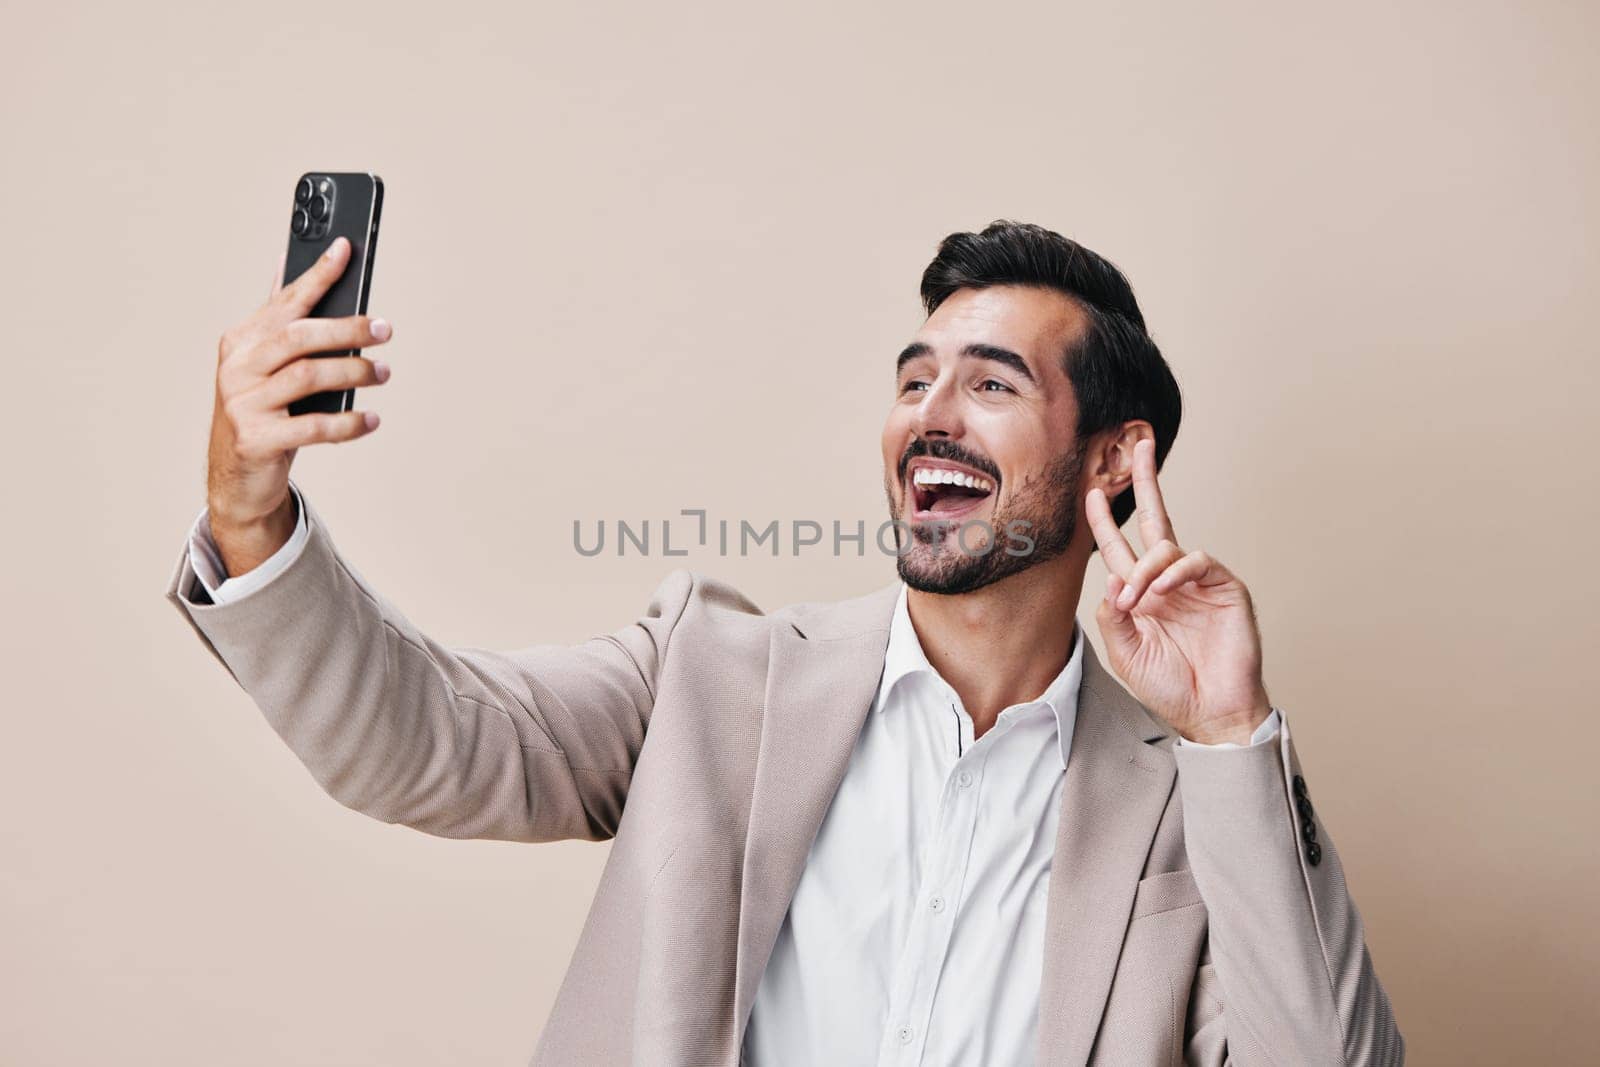 hold man happy message handsome lifestyle suit smile studio portrait phone selfies space beard smartphone confident call success young white copy business